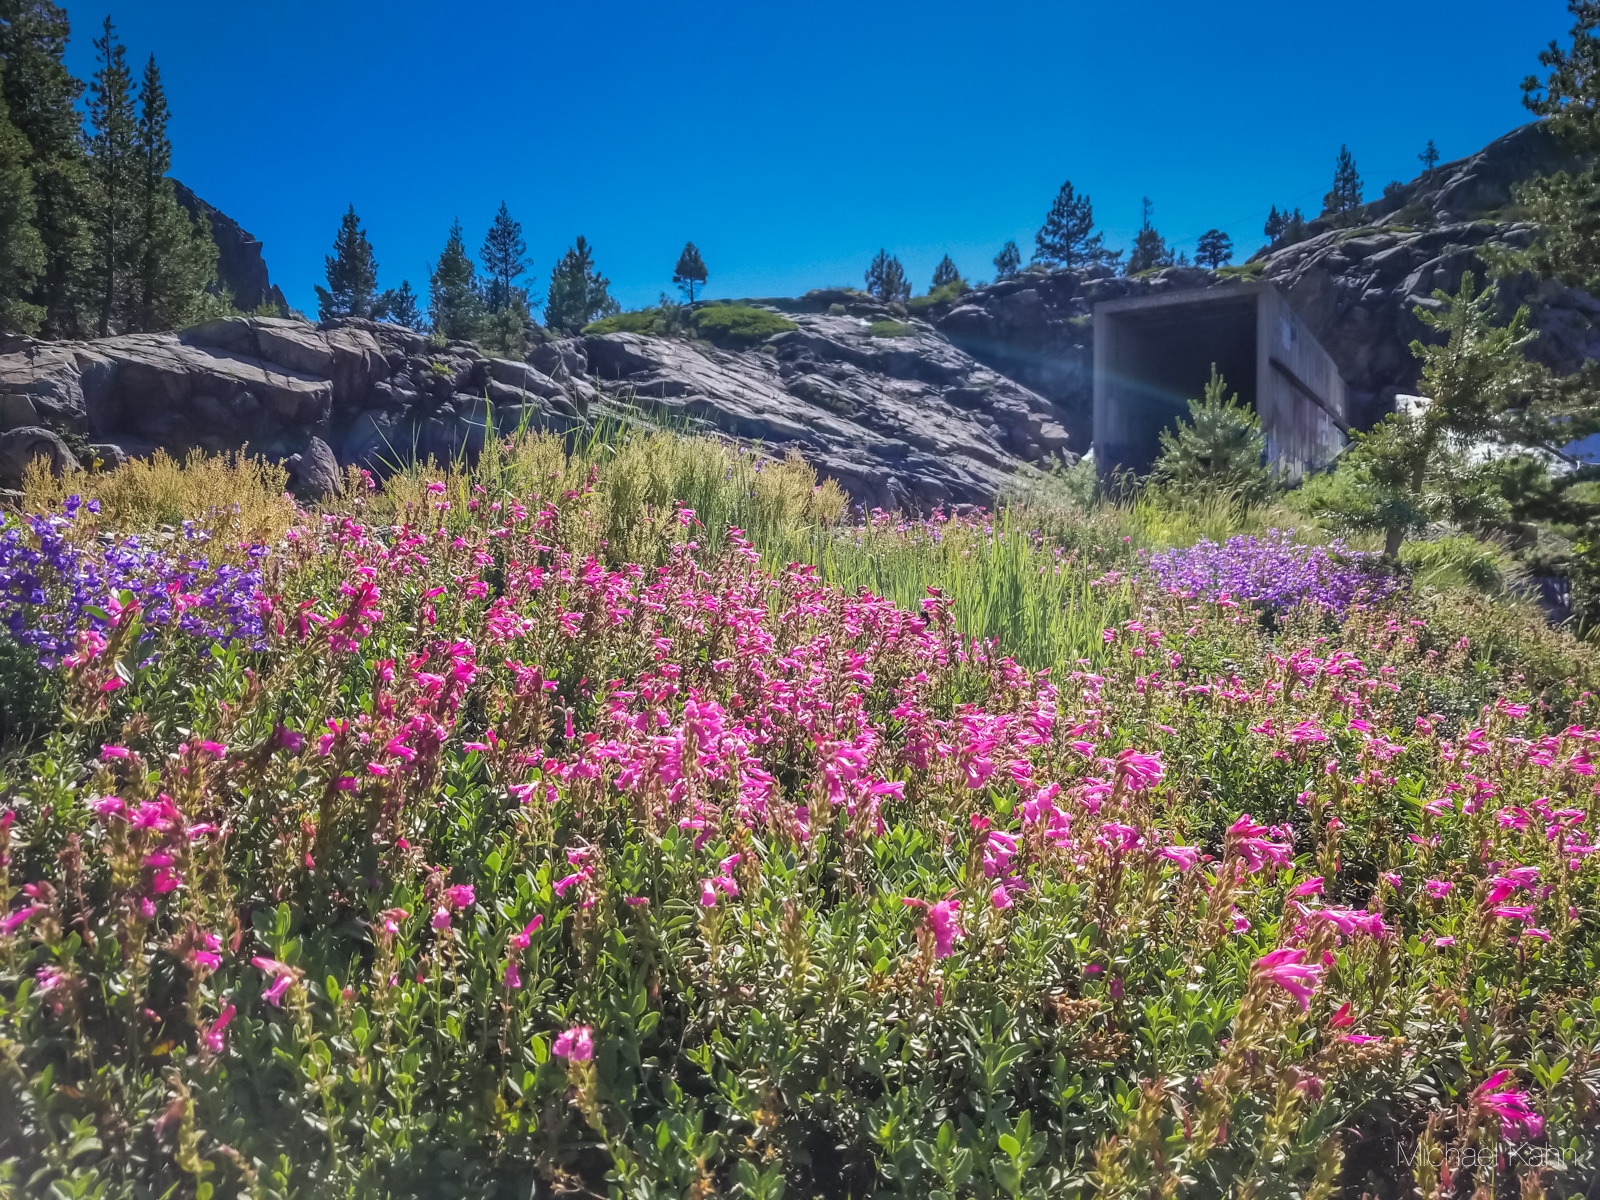 Donner pass summit tunnel hike, wildflowers